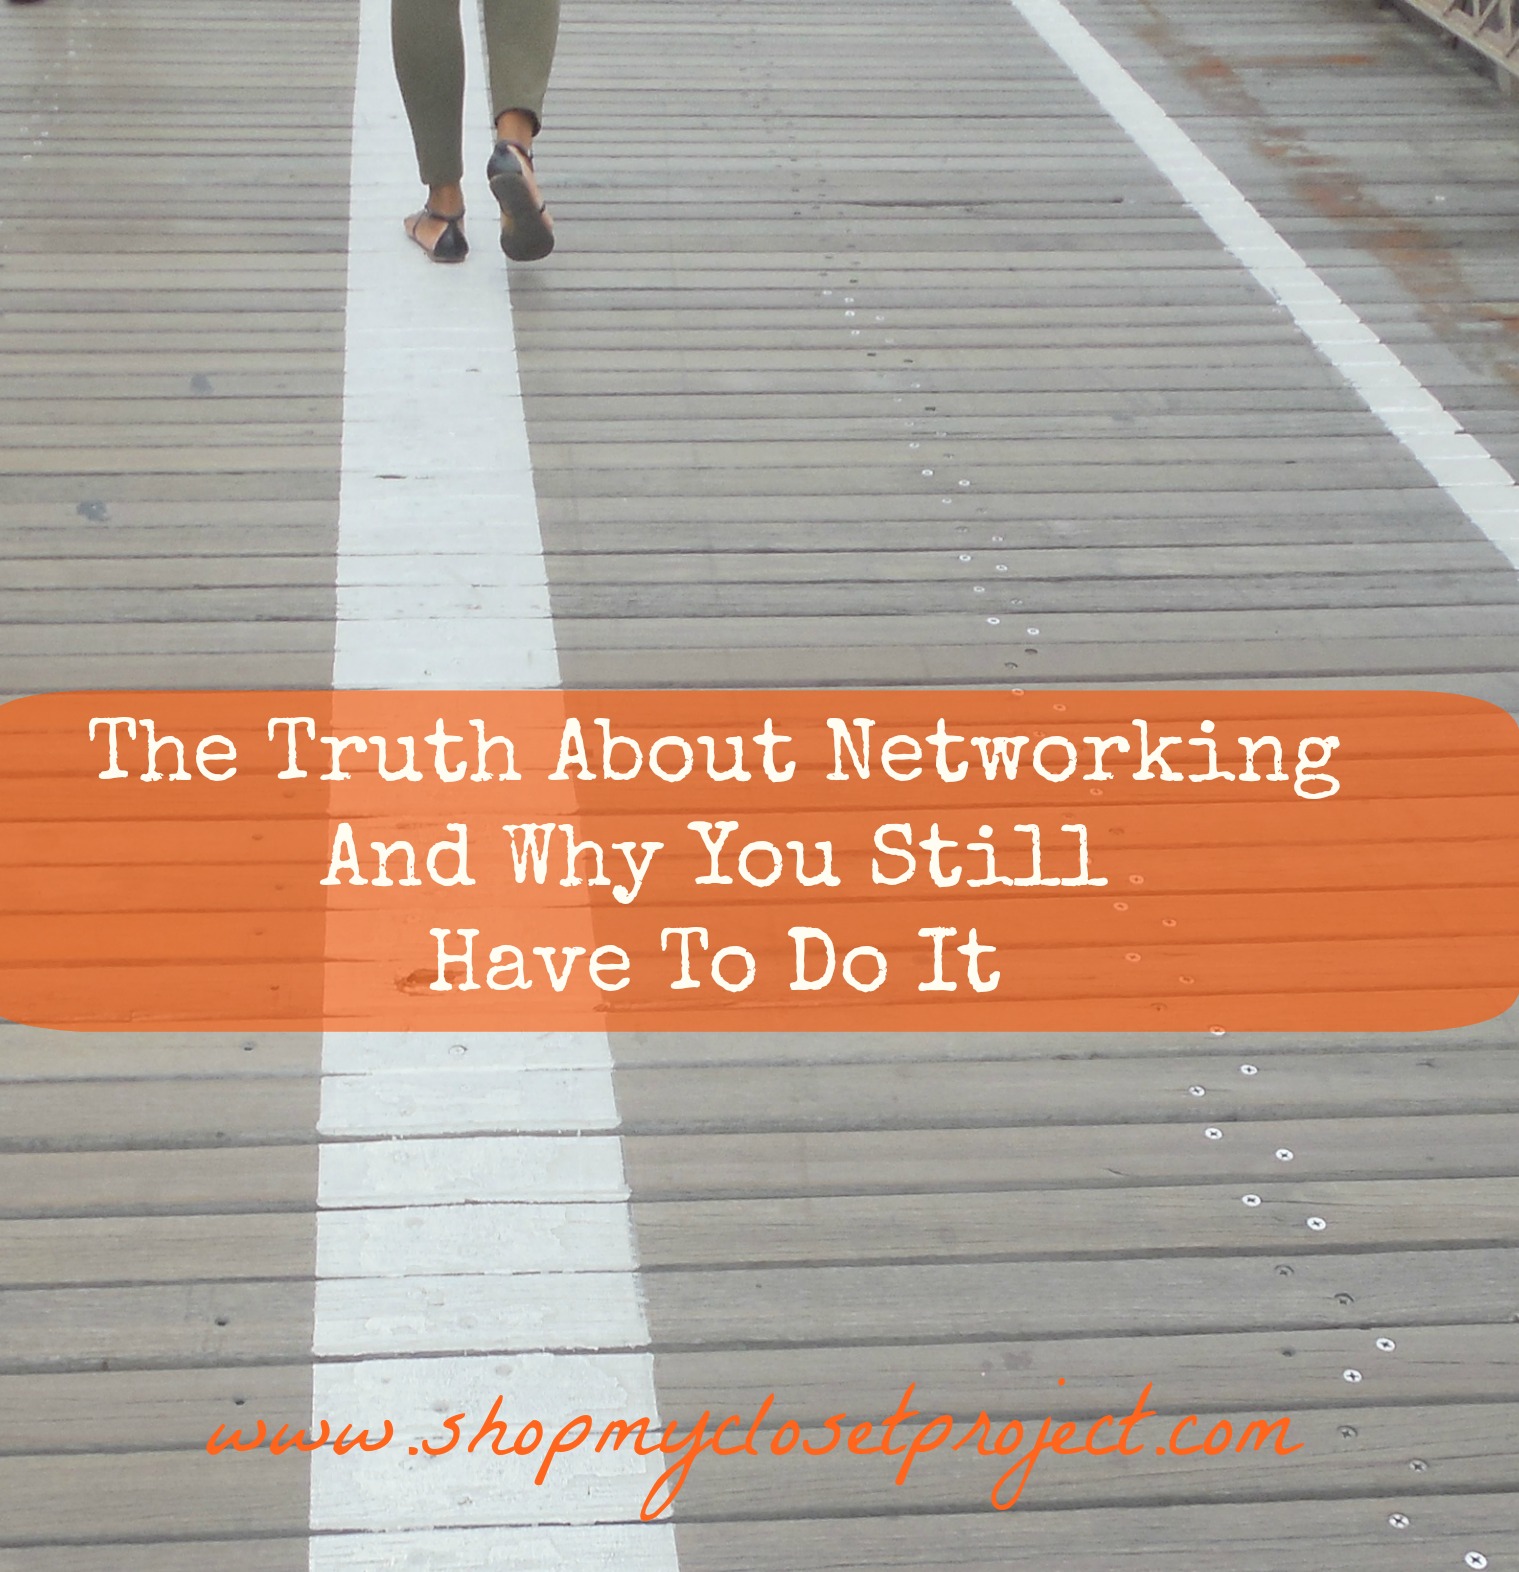 The Truth About Networking-And Why You Still Need To Do It!